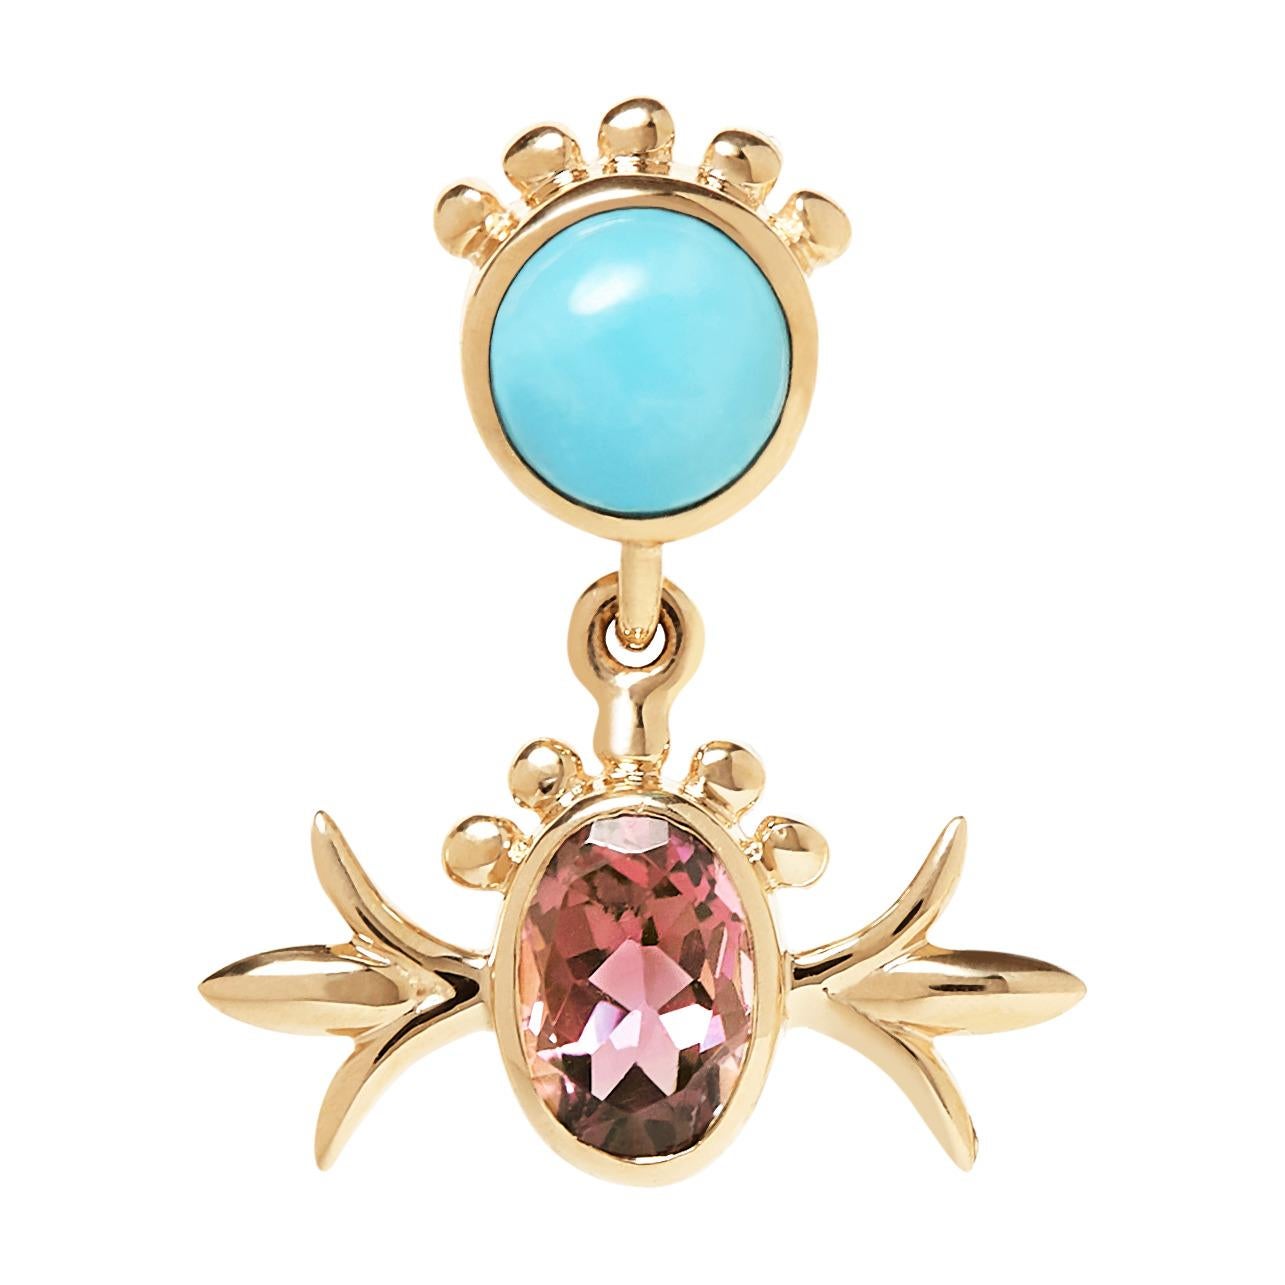 These Marlo Laz 14 Karat yellow gold turquoise and pink tourmaline squash blossom hanging studs are inspired by the southwest and an ode to Native American Navajo jewelry. 

From the Desert Rising collection, these earrings are available for special